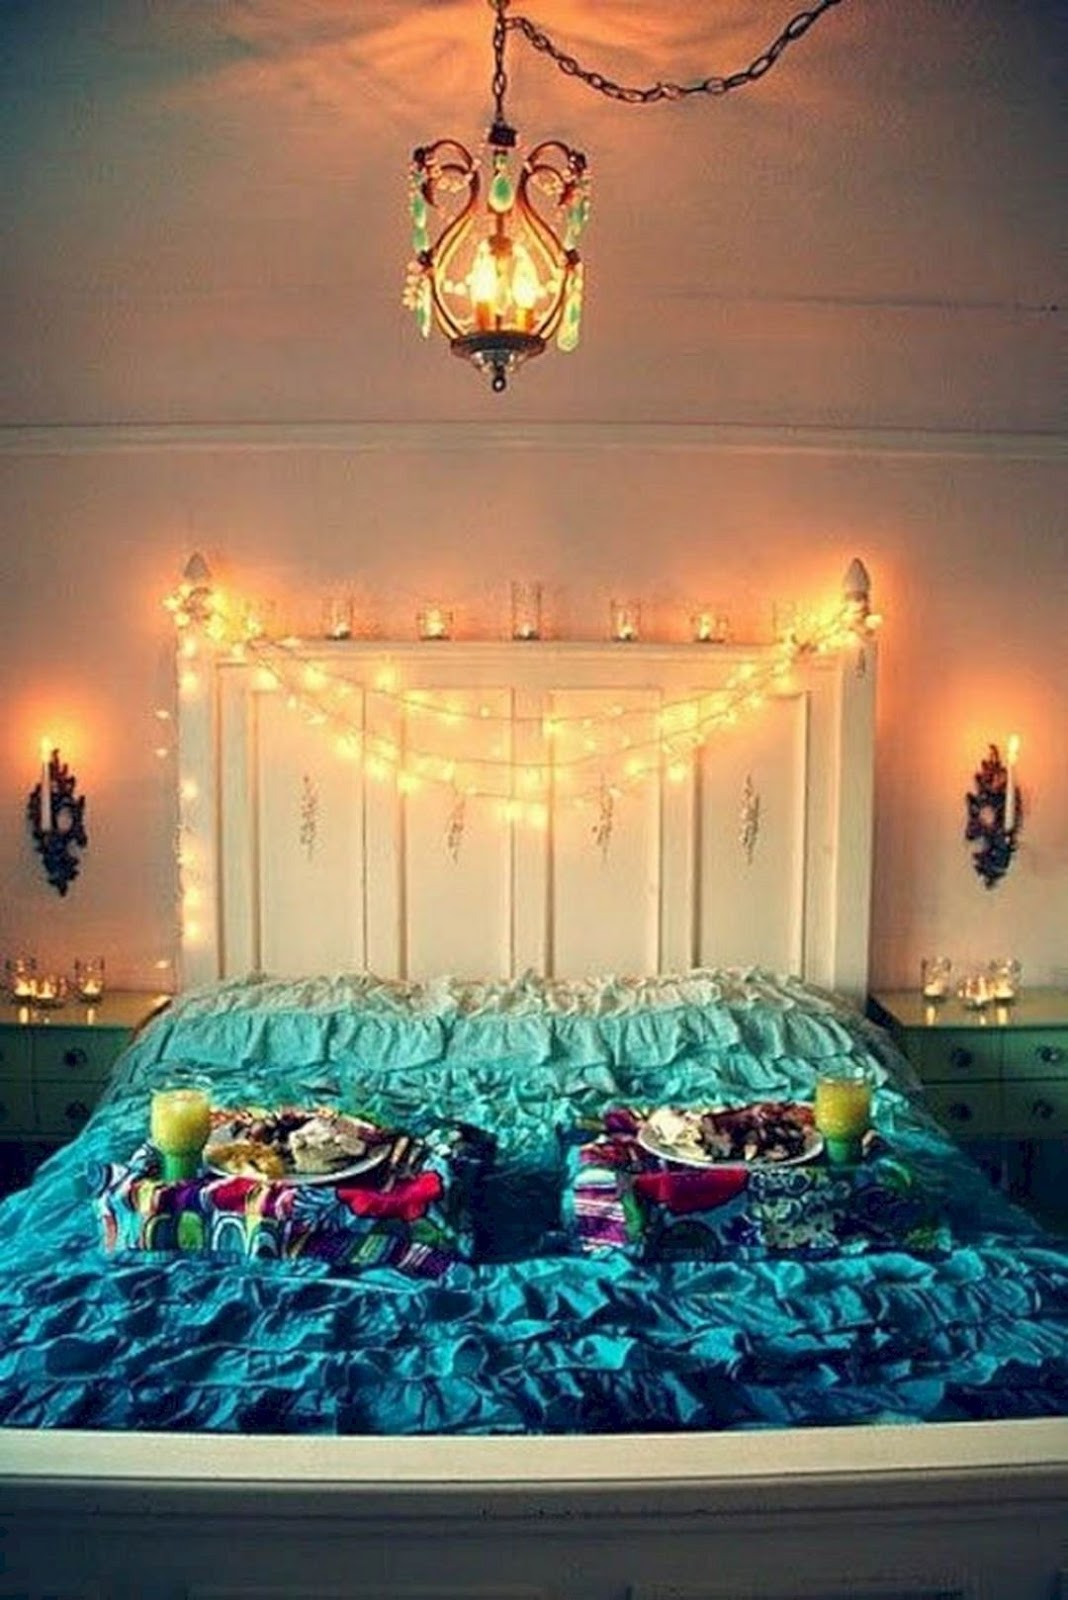 50+ Amazing Bedroom With Christmas Lights Decoration Ideas | ARA HOME